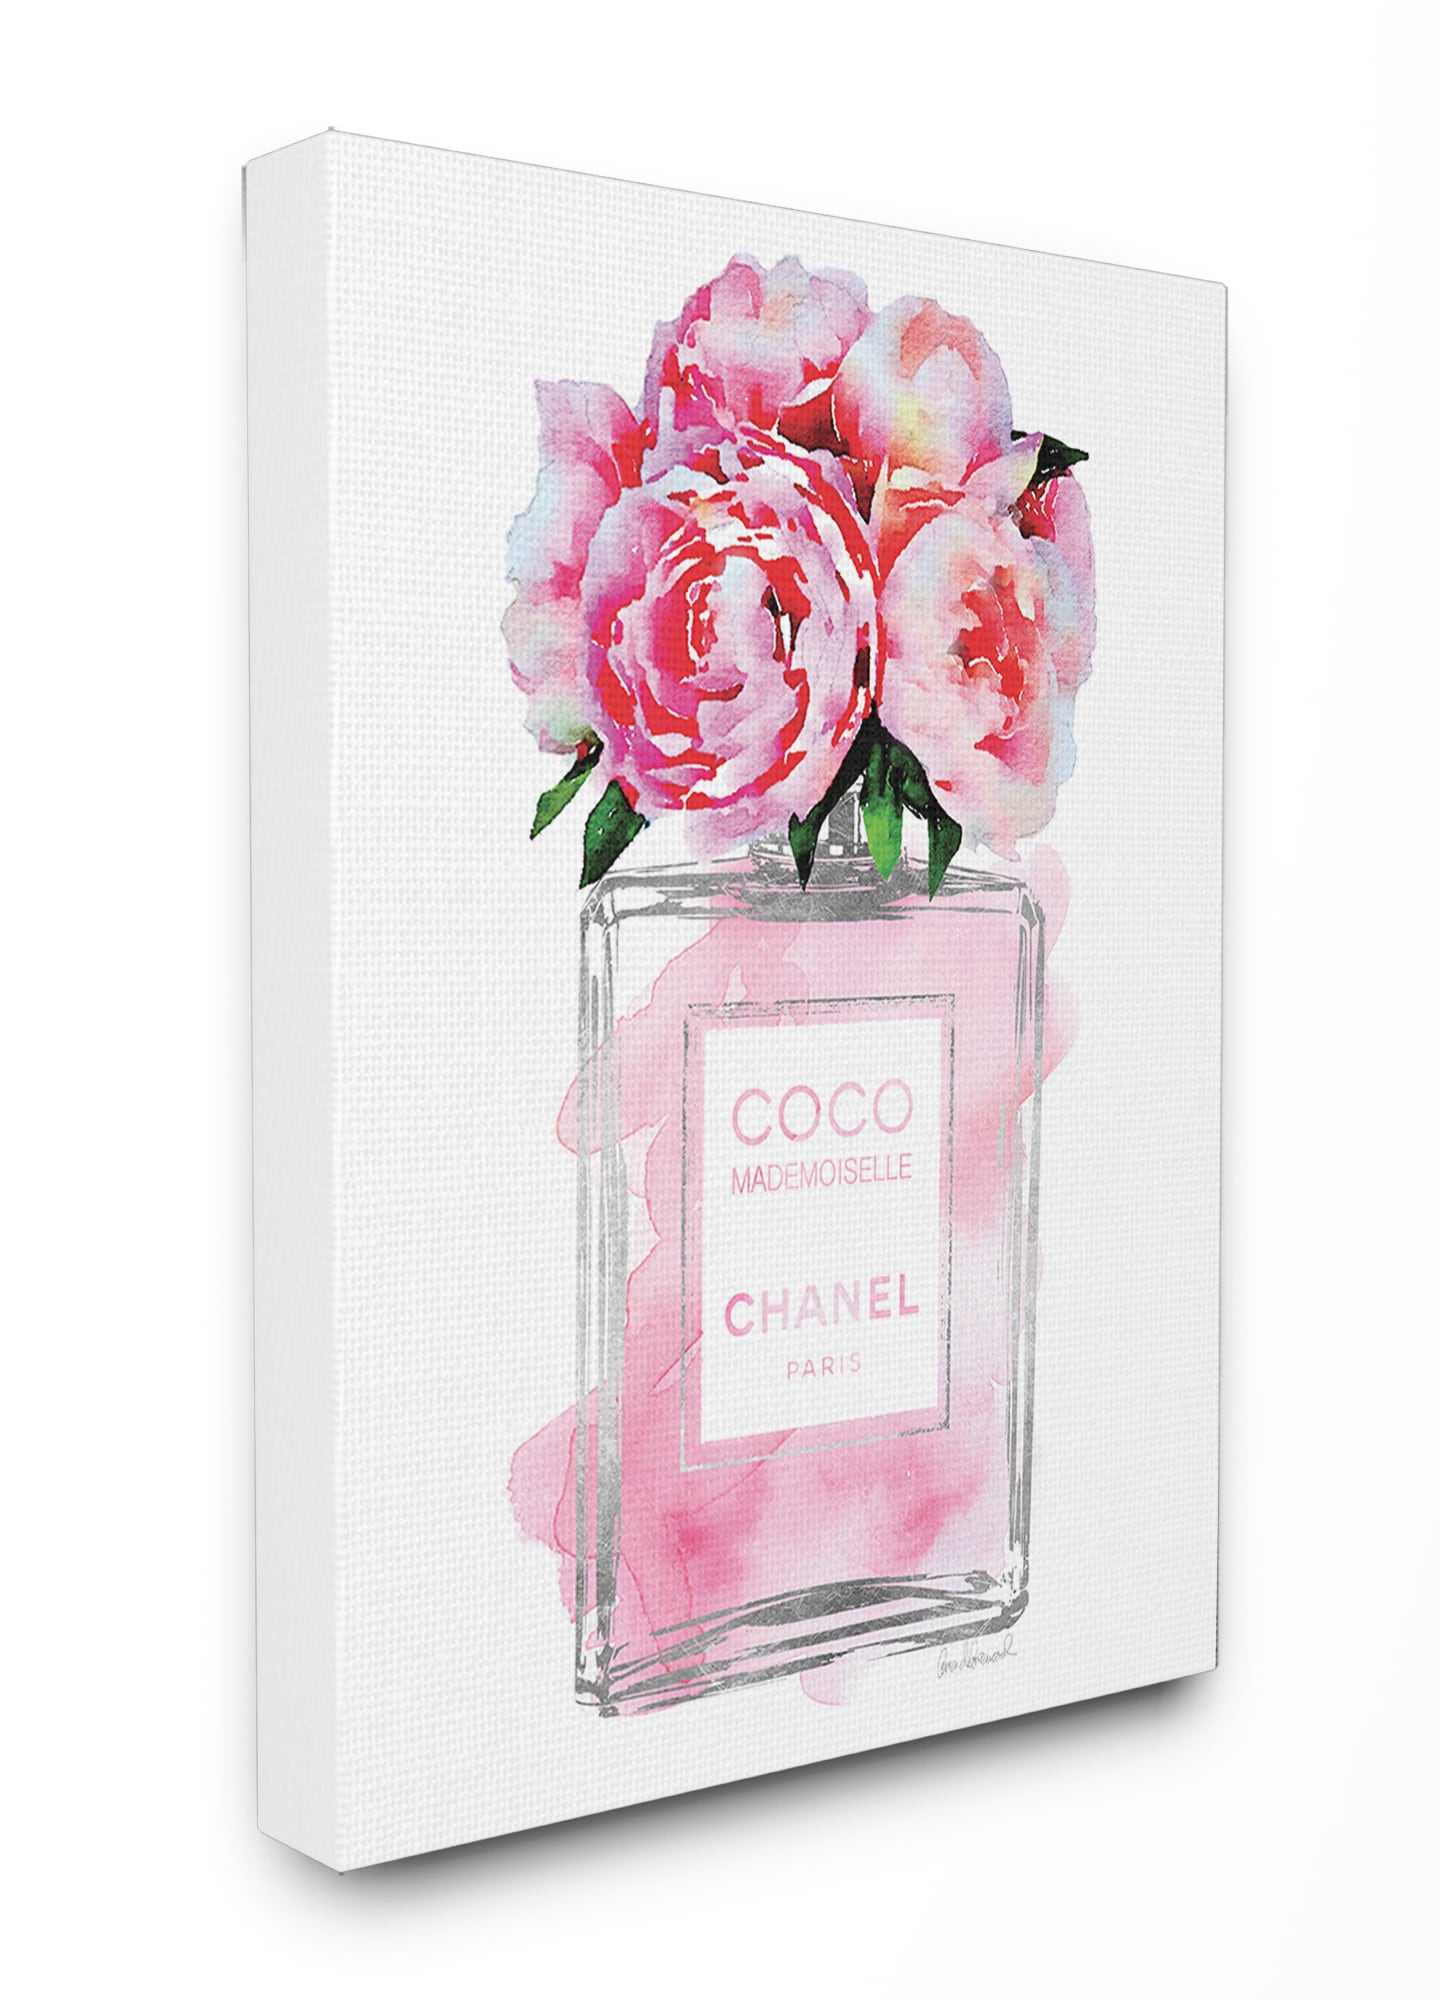 Bookstack Topped By Vase With White Peony Art: Canvas Prints